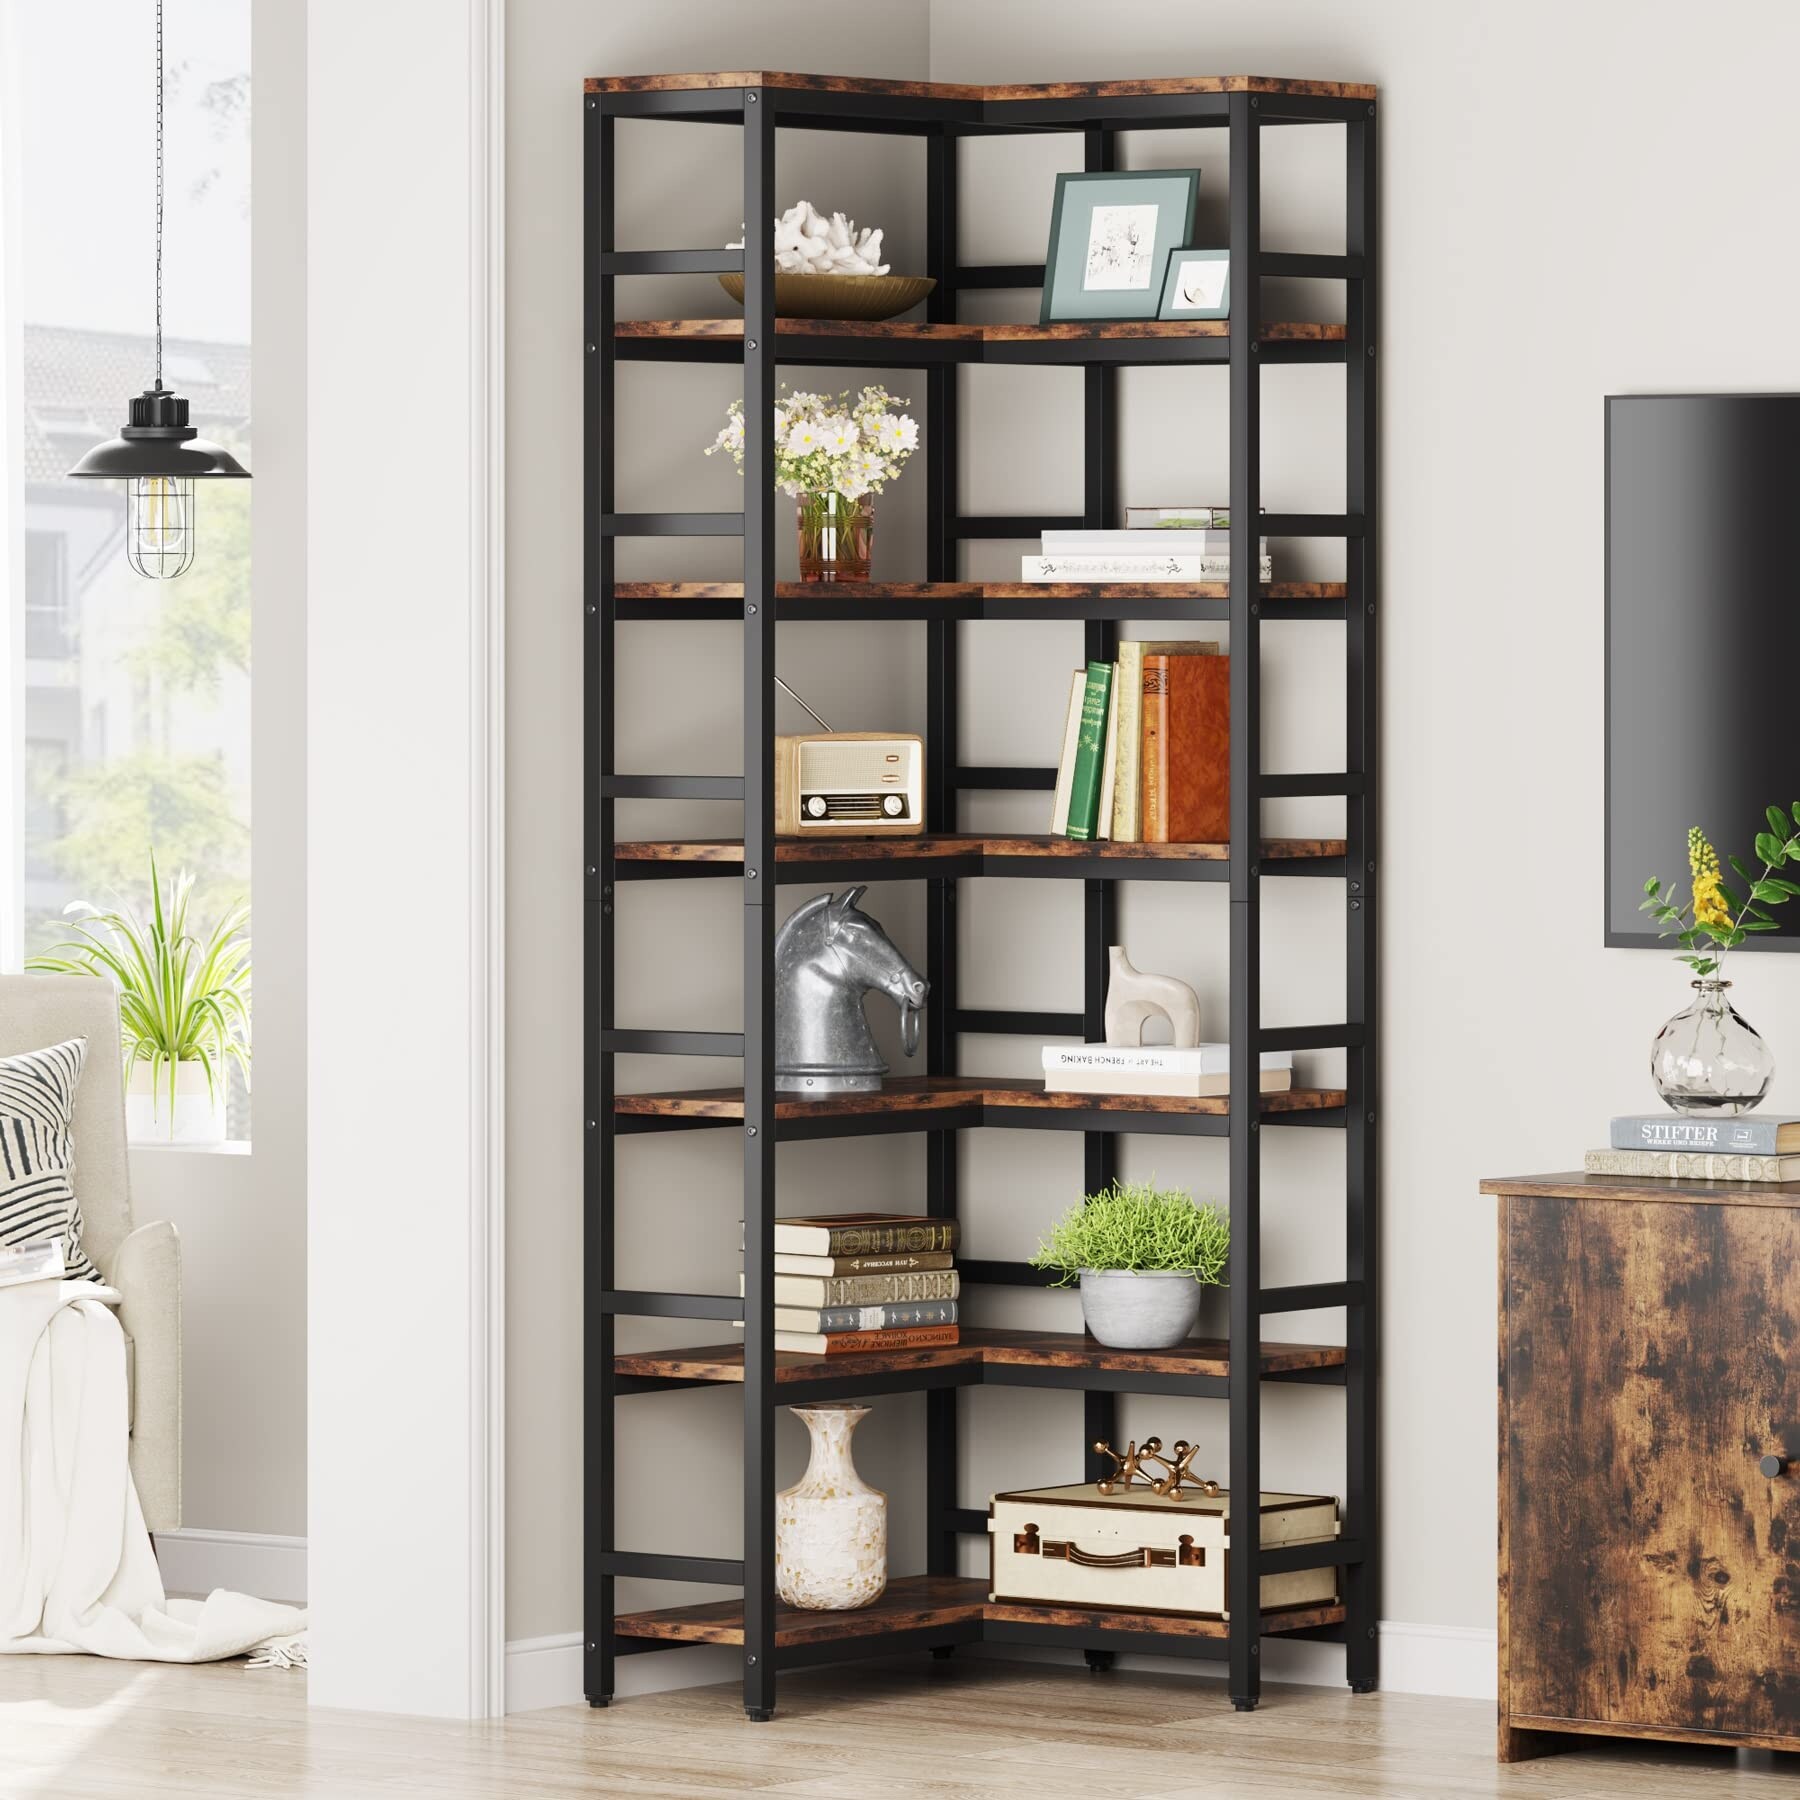 https://ak1.ostkcdn.com/images/products/is/images/direct/c411a1be14b3c2715f0936231a54a3e21026b084/5-Tier-Corner-Bookshelf%2C-Industrial-Large-Corner-Etagere-Bookcase-for-Living-Room-Home-Office%2C-Rustic-Brown.jpg